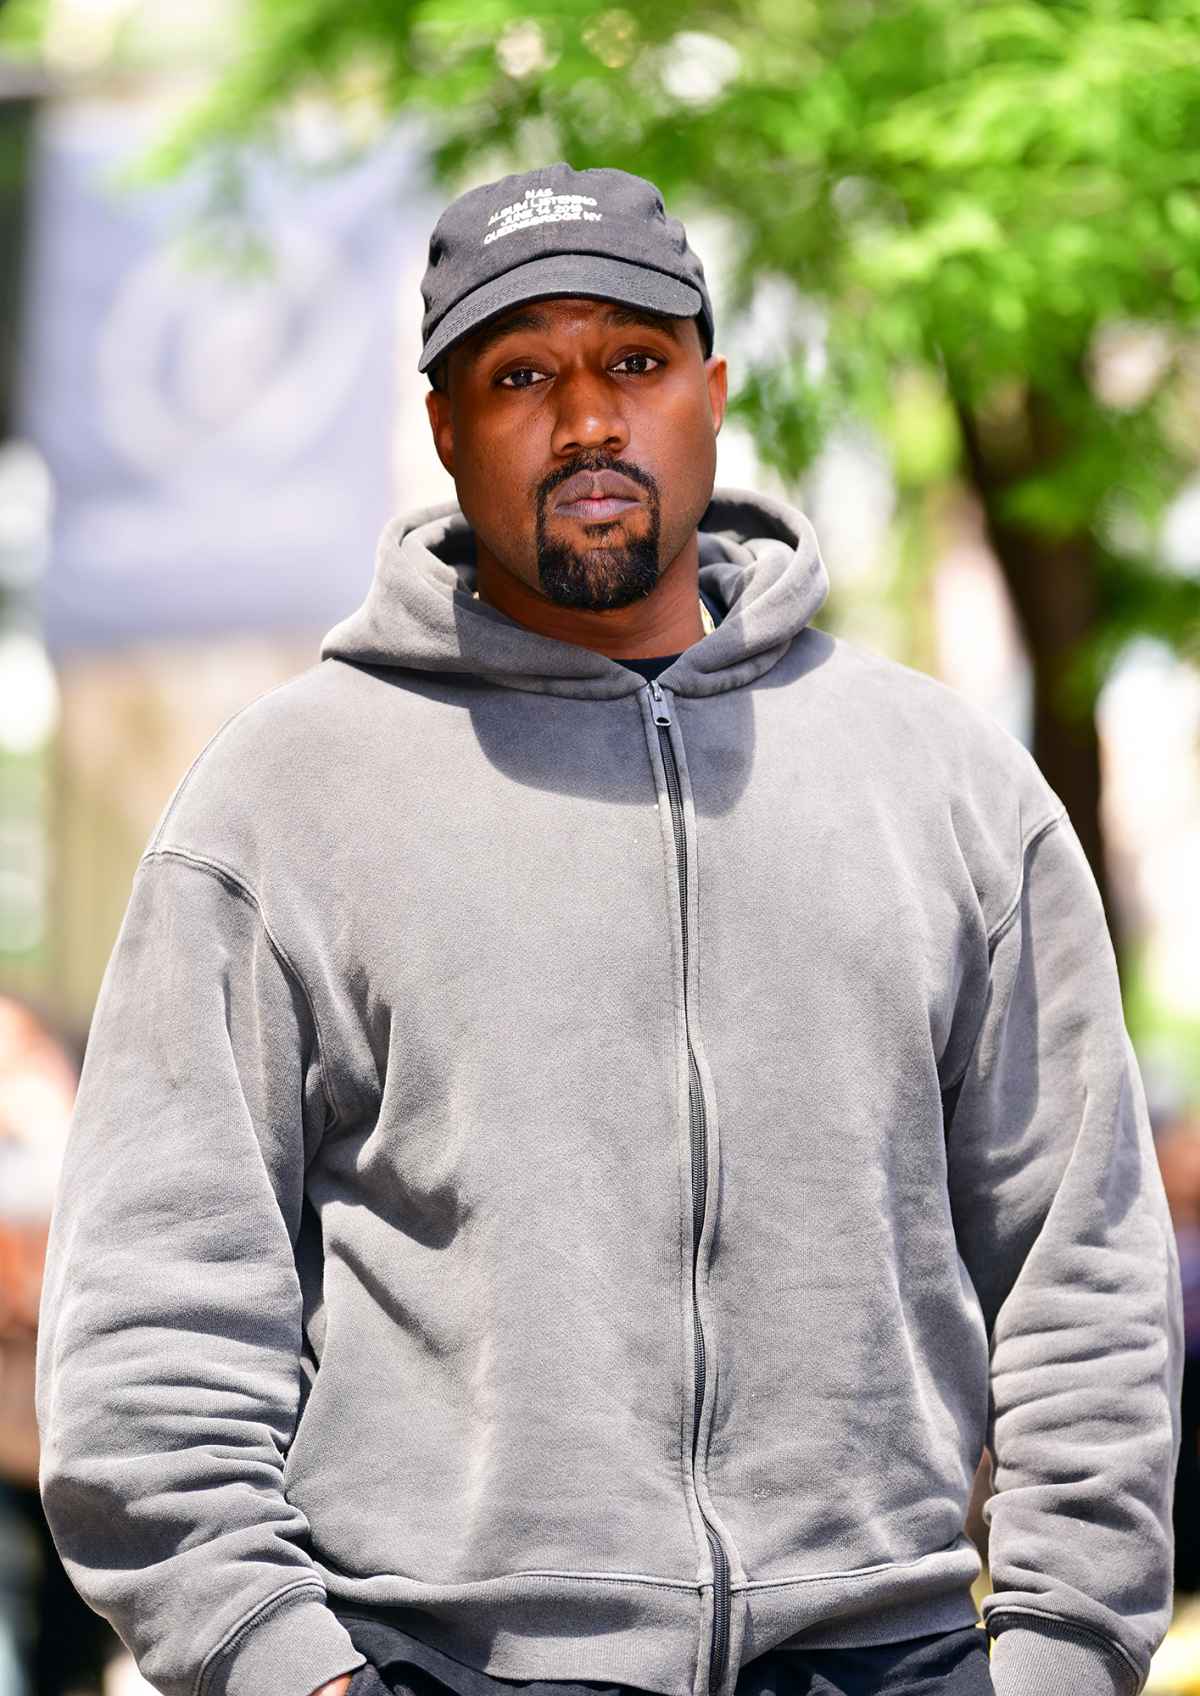 Www Xxx Sexy Video Downlode Com - Kanye West: 'I Still Look at Pornhub' After Having Daughters